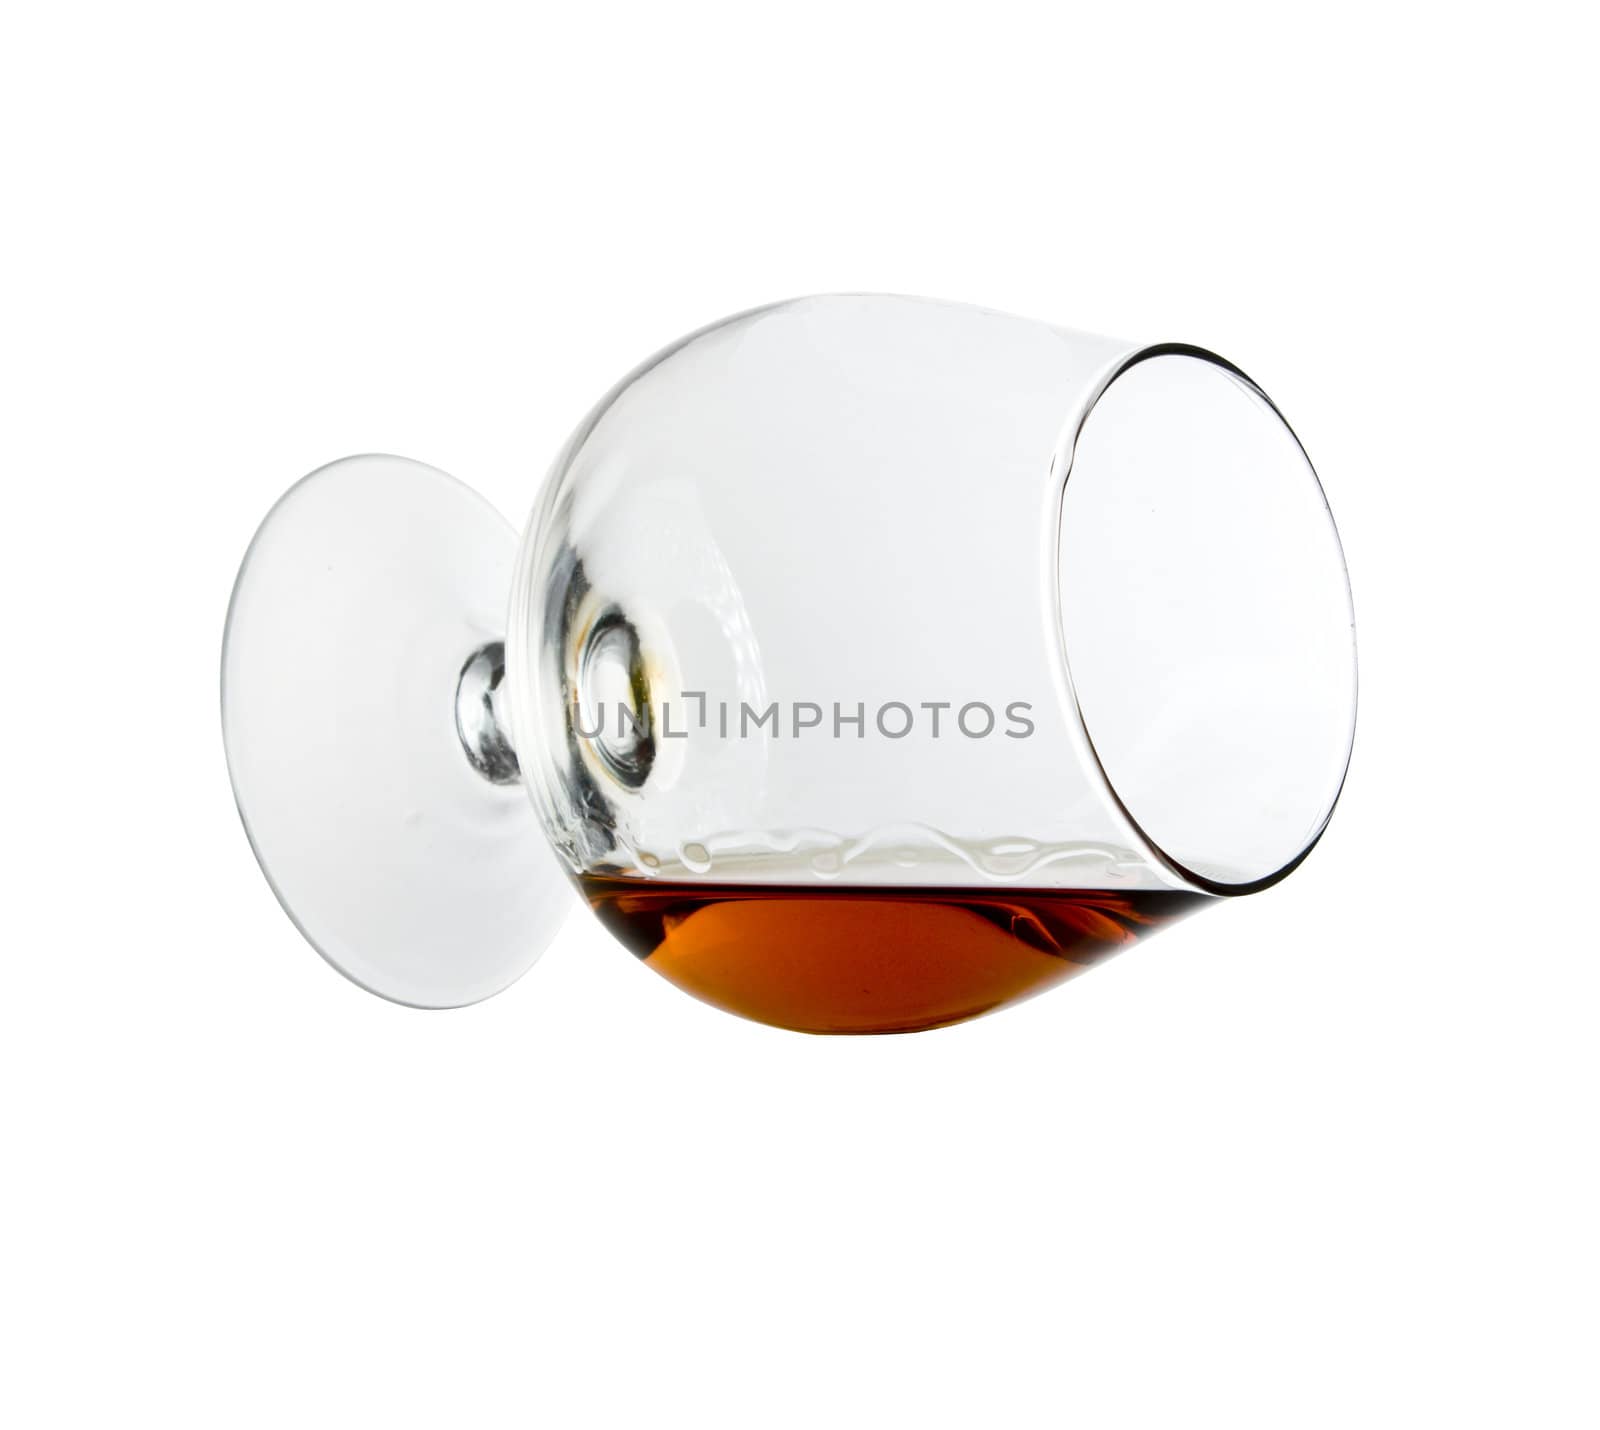 Cognac in the big glass on a white background